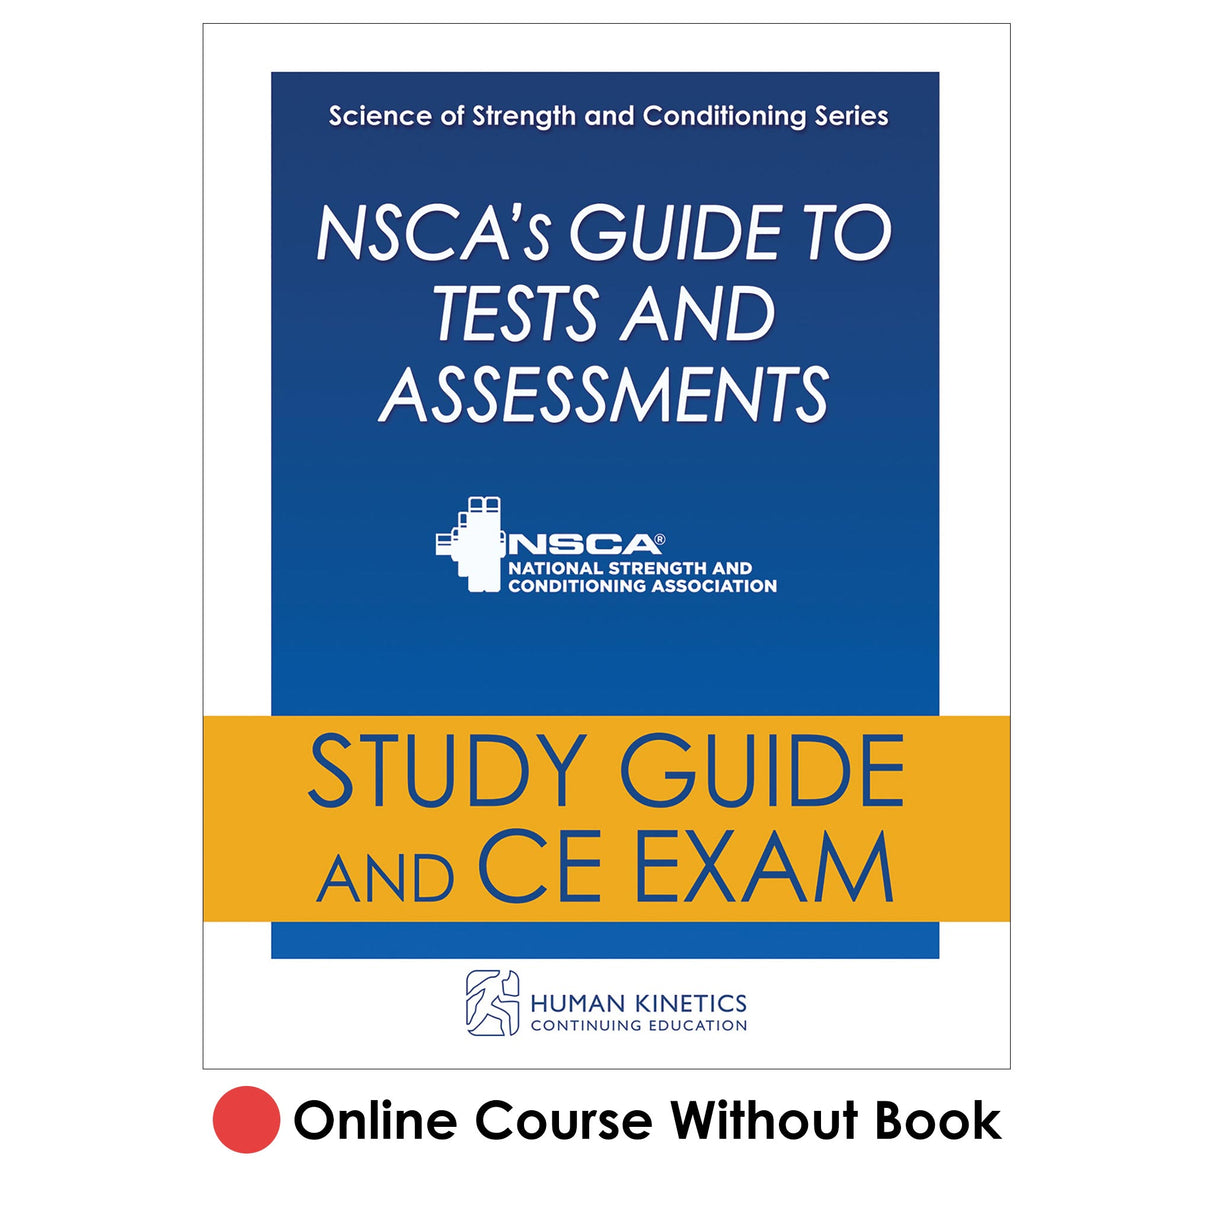 NSCA's Guide to Tests and Assessments Online CE Course Without Book